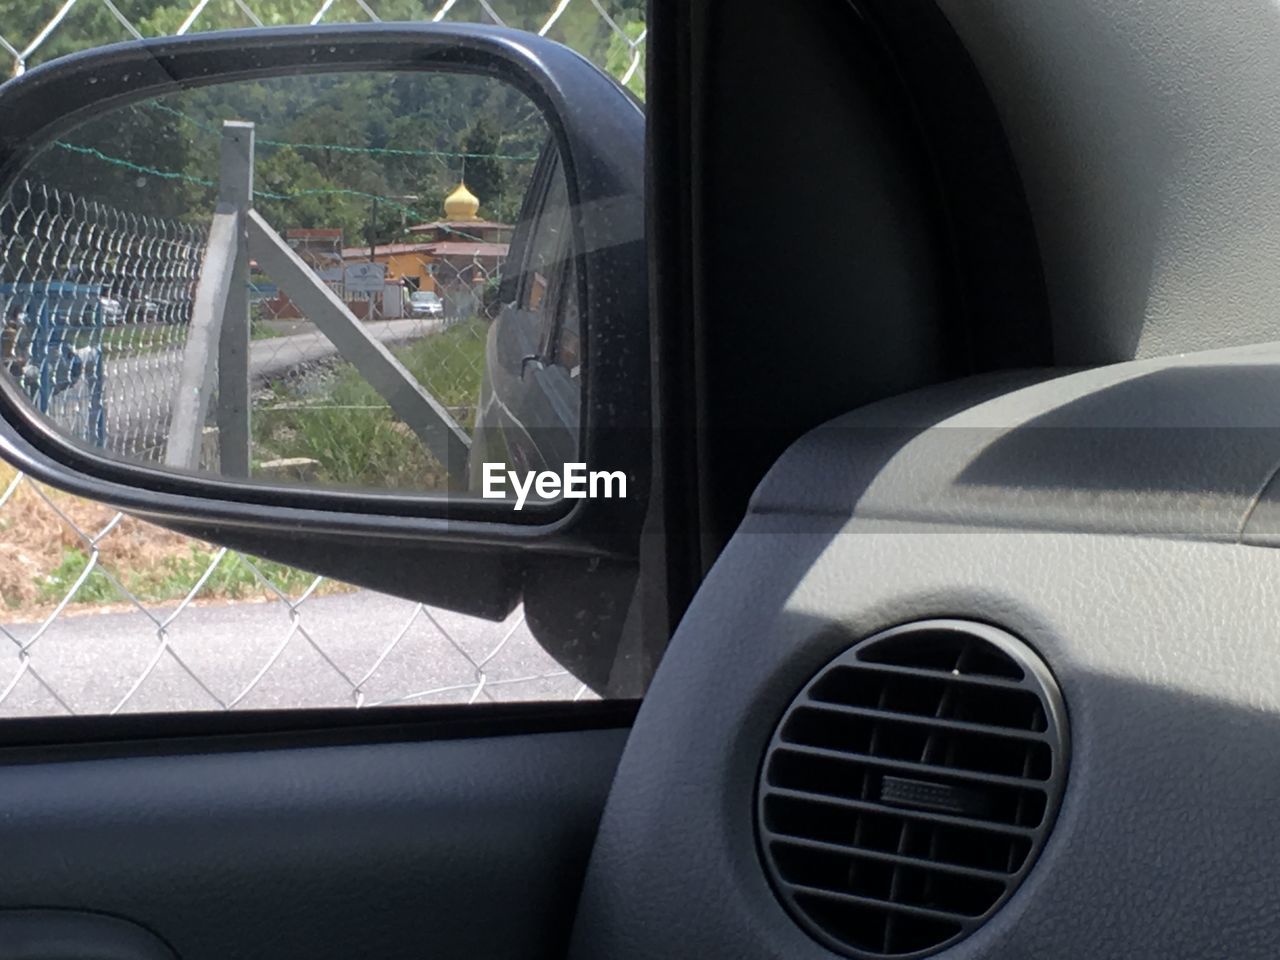 REFLECTION OF CAR ON SIDE-VIEW MIRROR OF VEHICLE